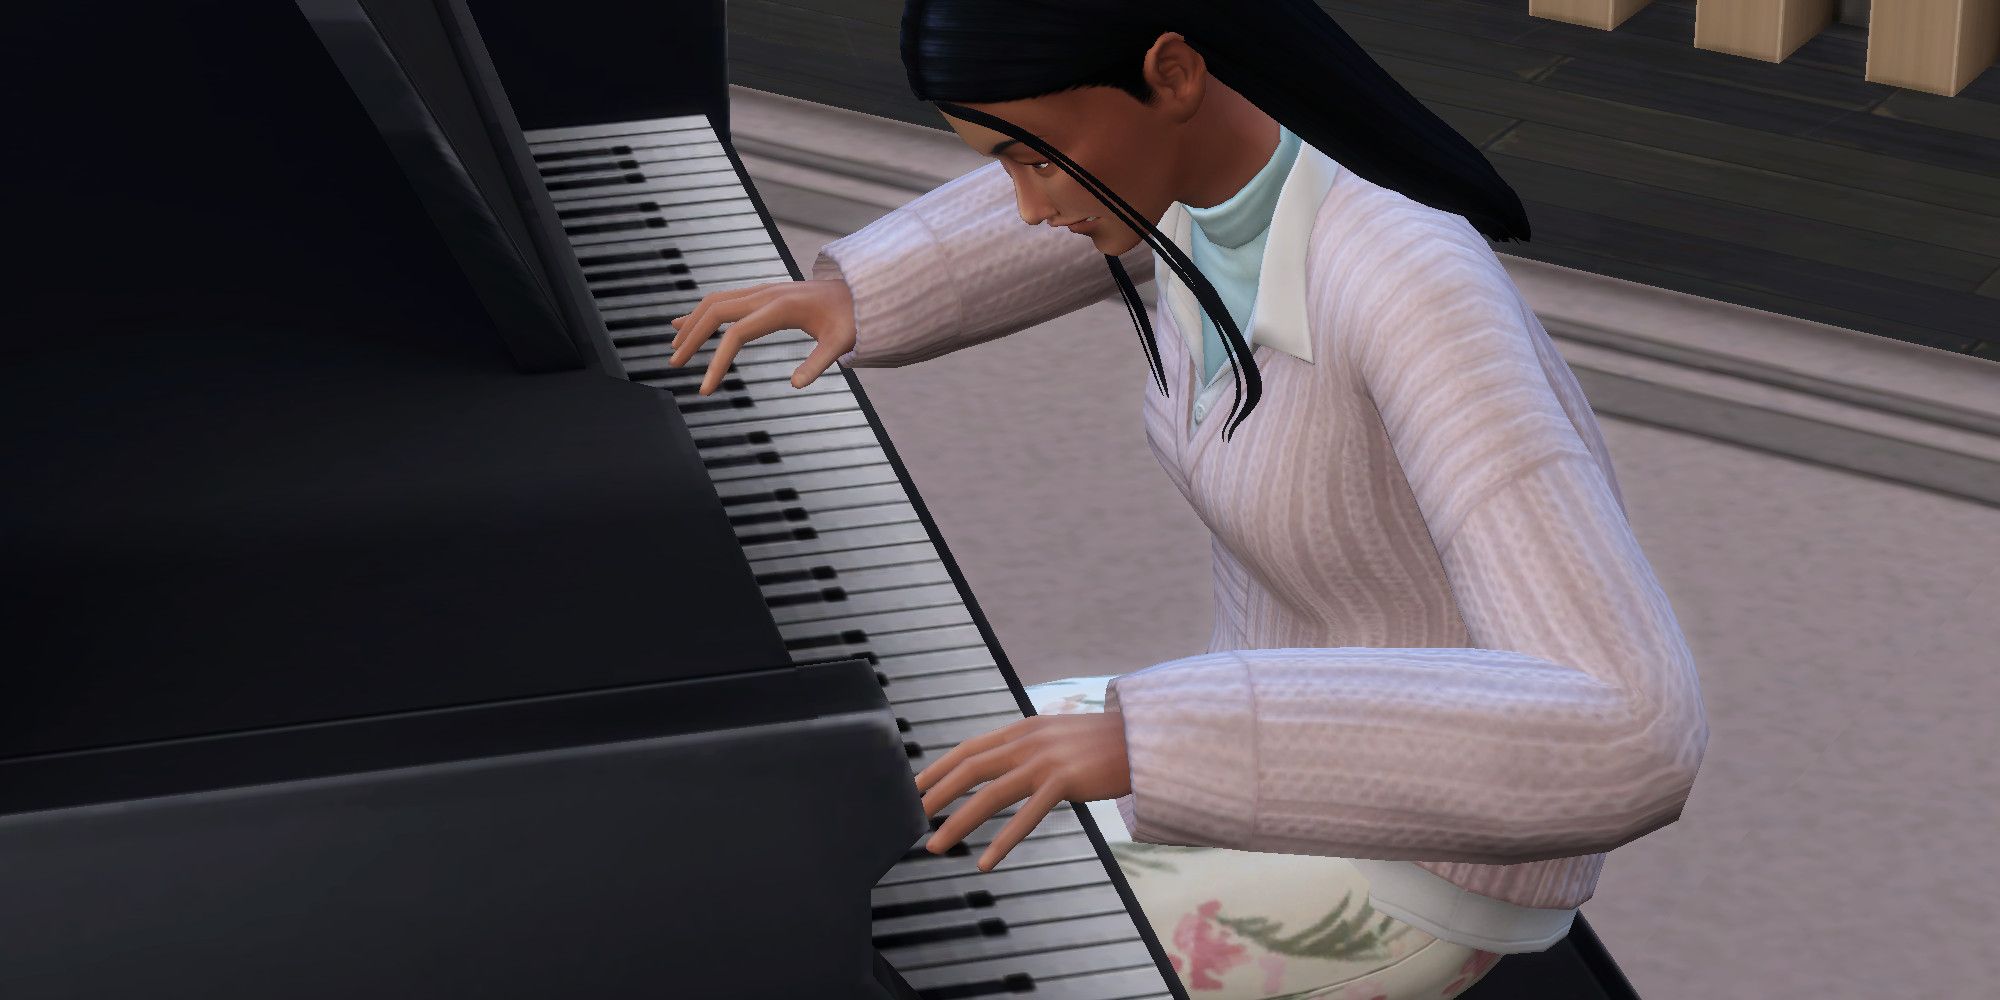 A Sim from The Sims 4 playing the piano